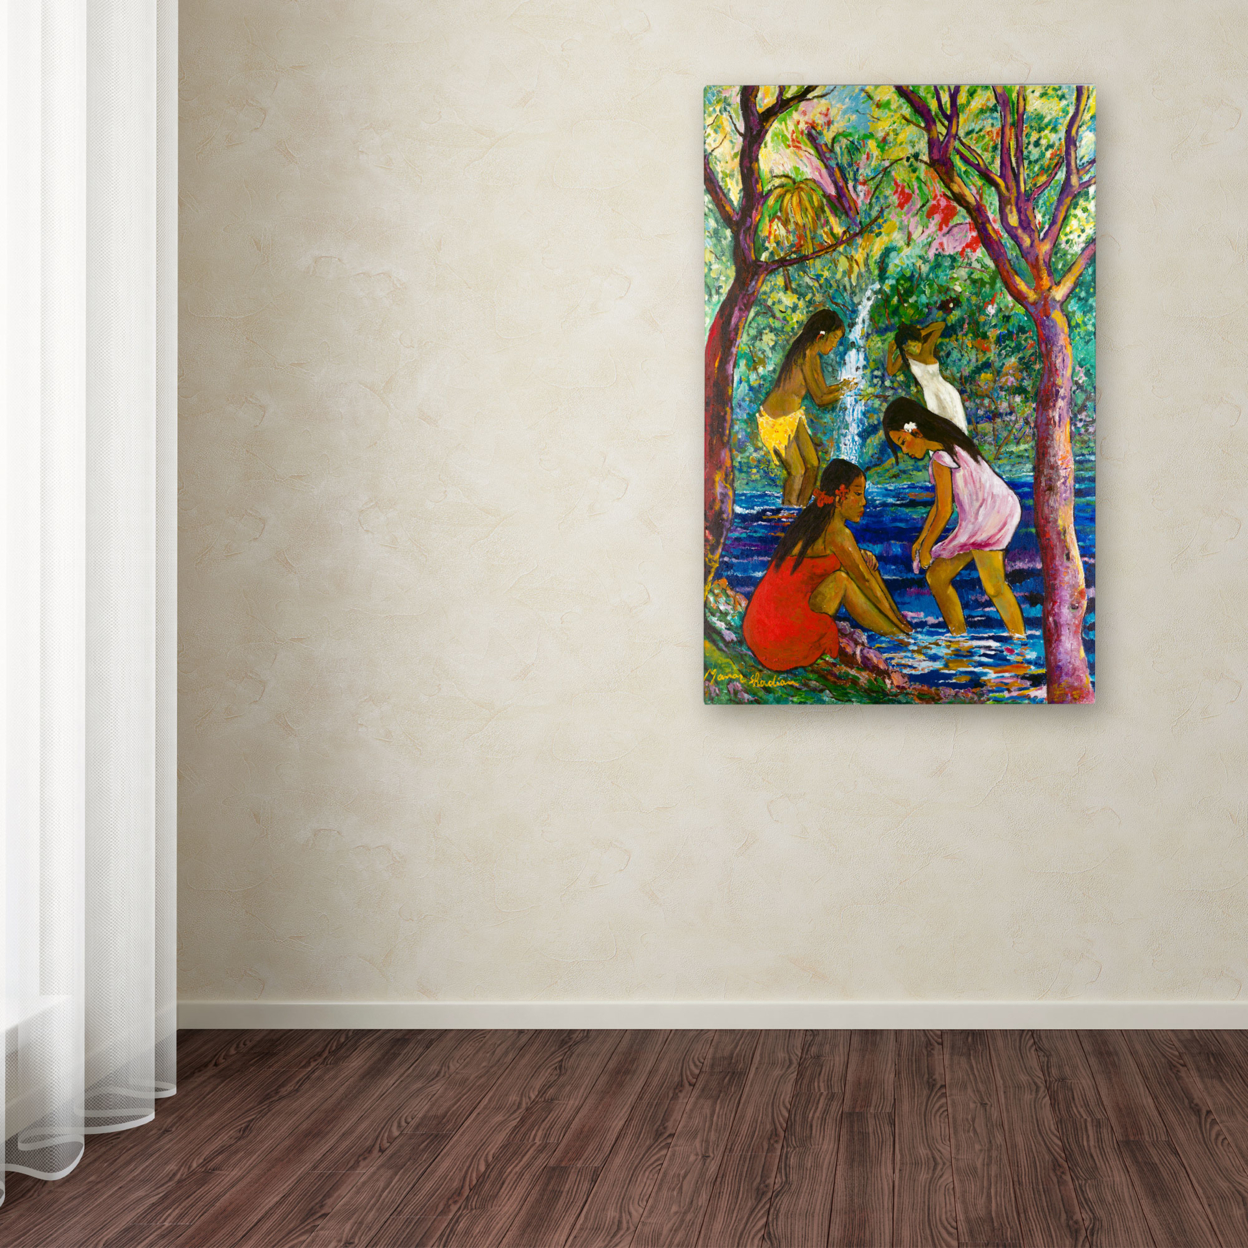 Manor Shadian 'Four Girls In Maui' Canvas Art 16 X 24